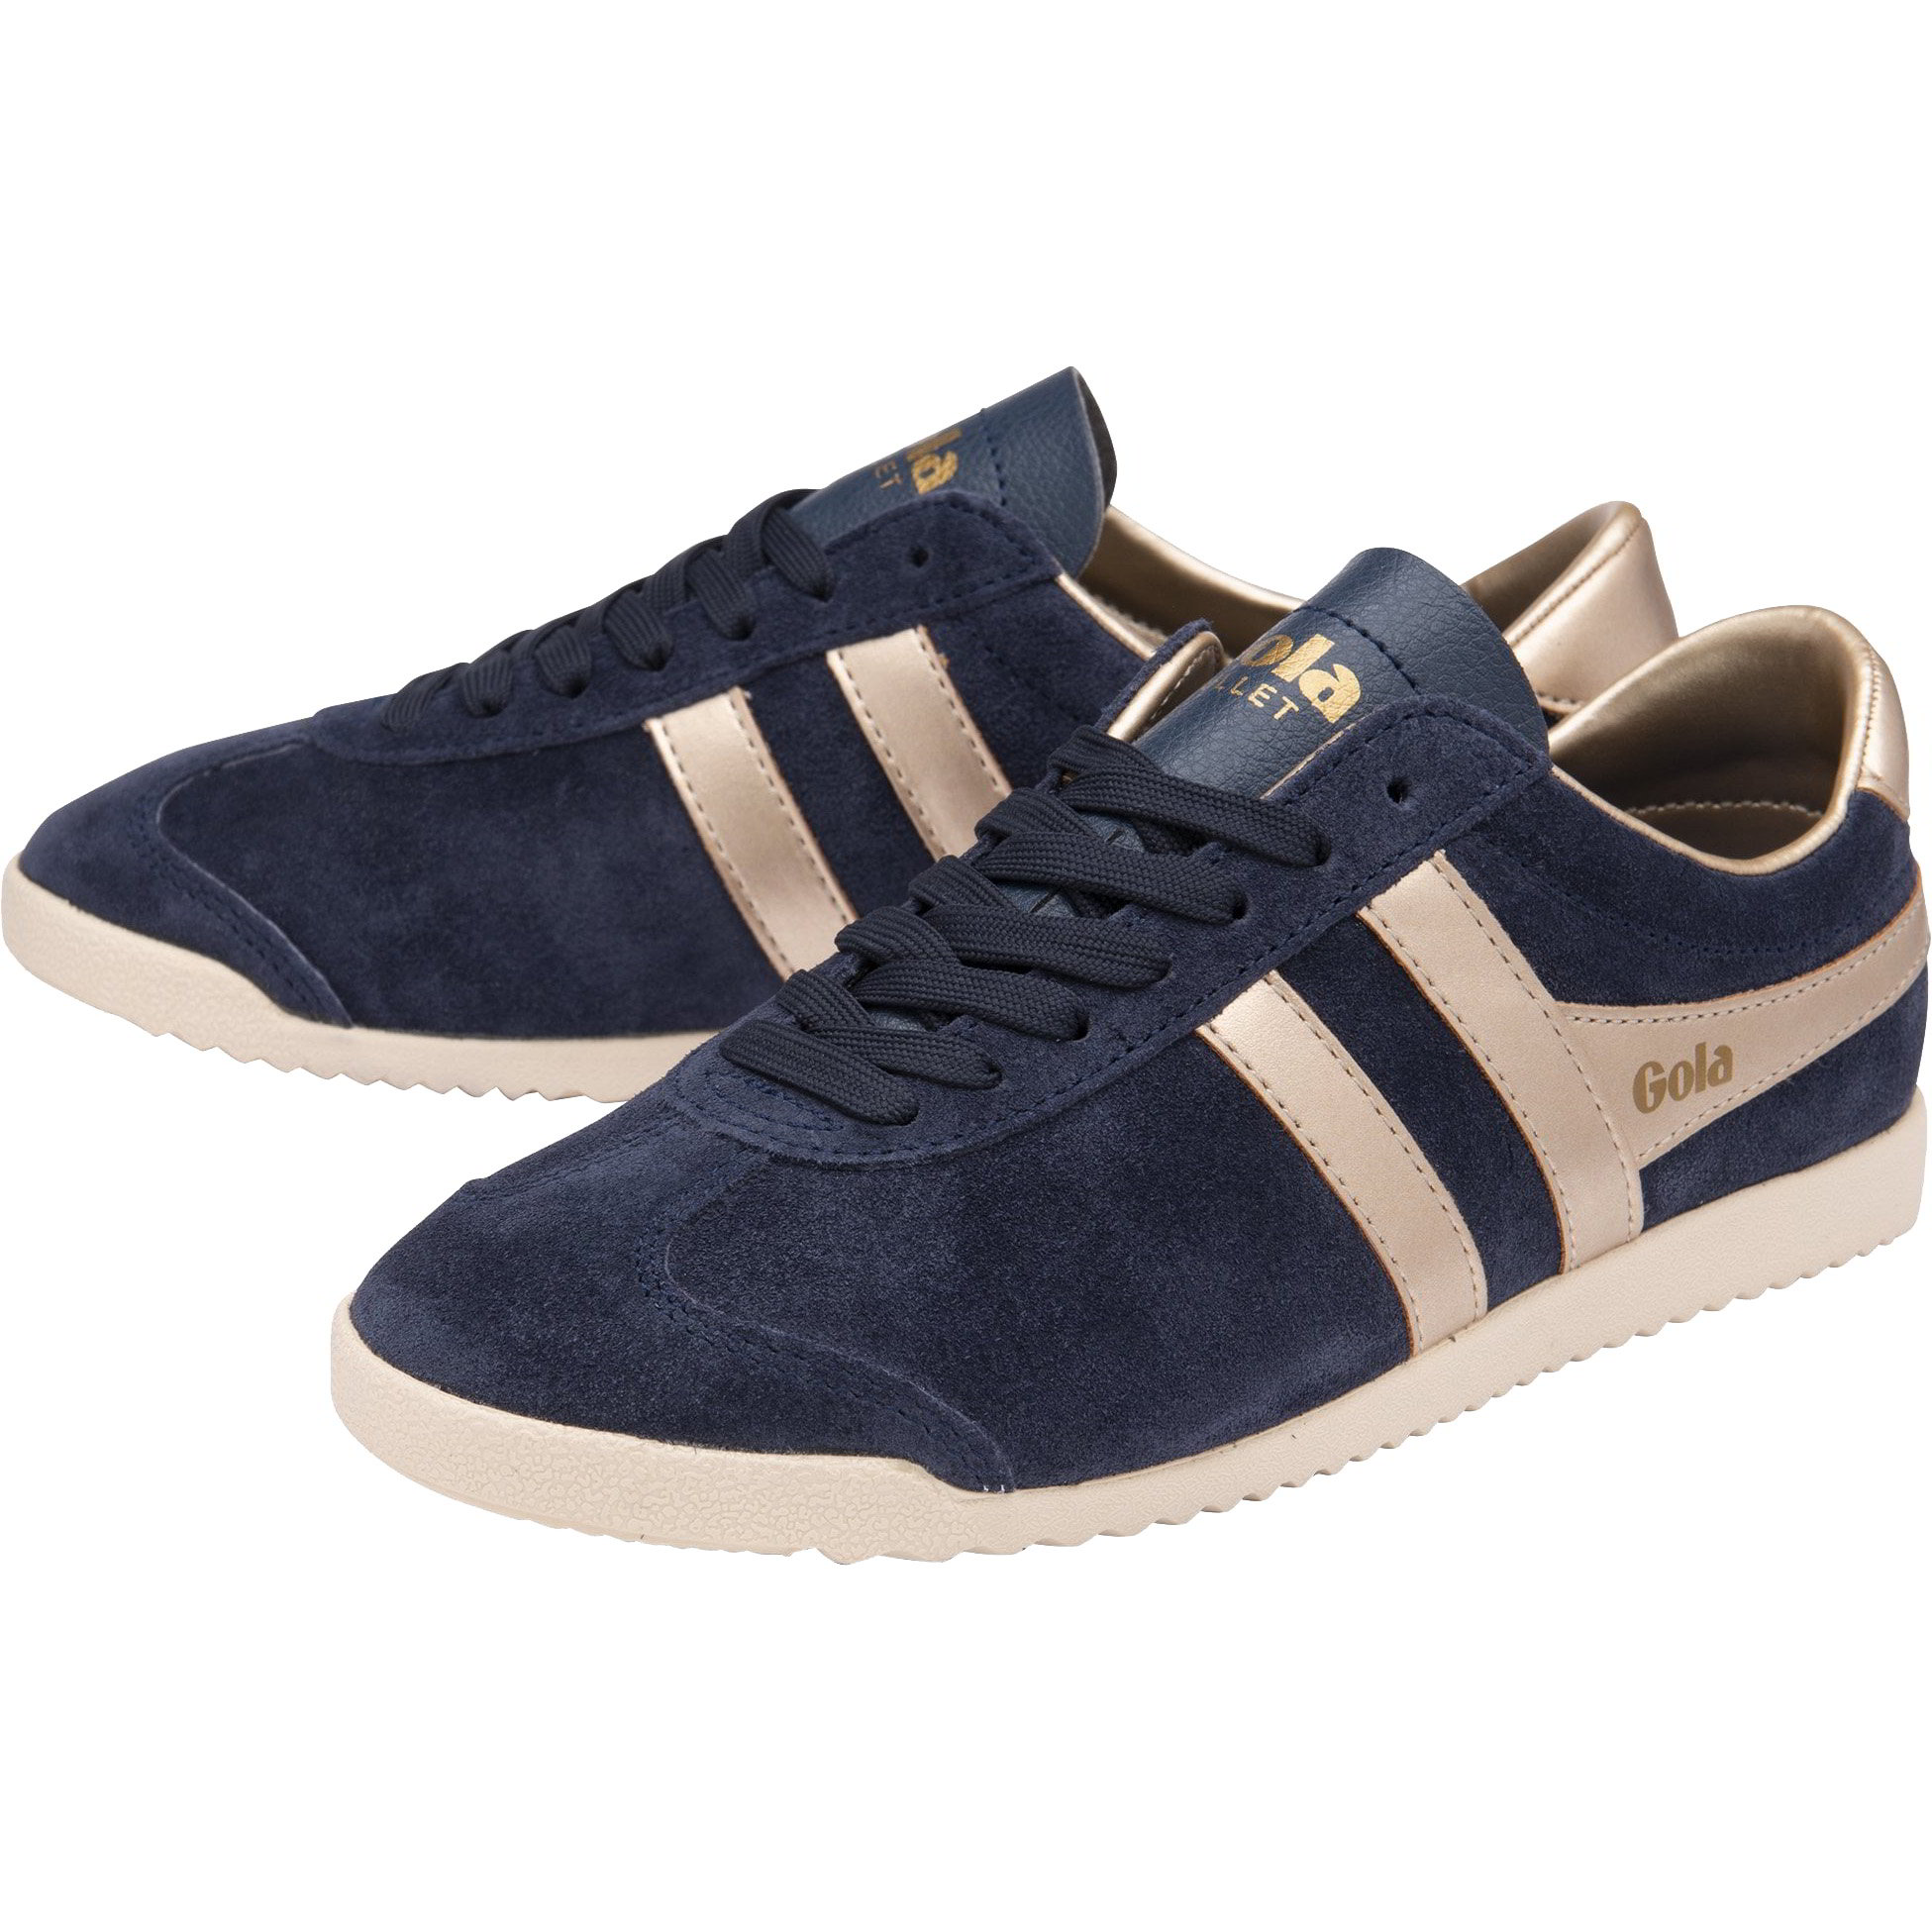 Gola Womens Bullet Pearl Trainers - Navy Gold 2951